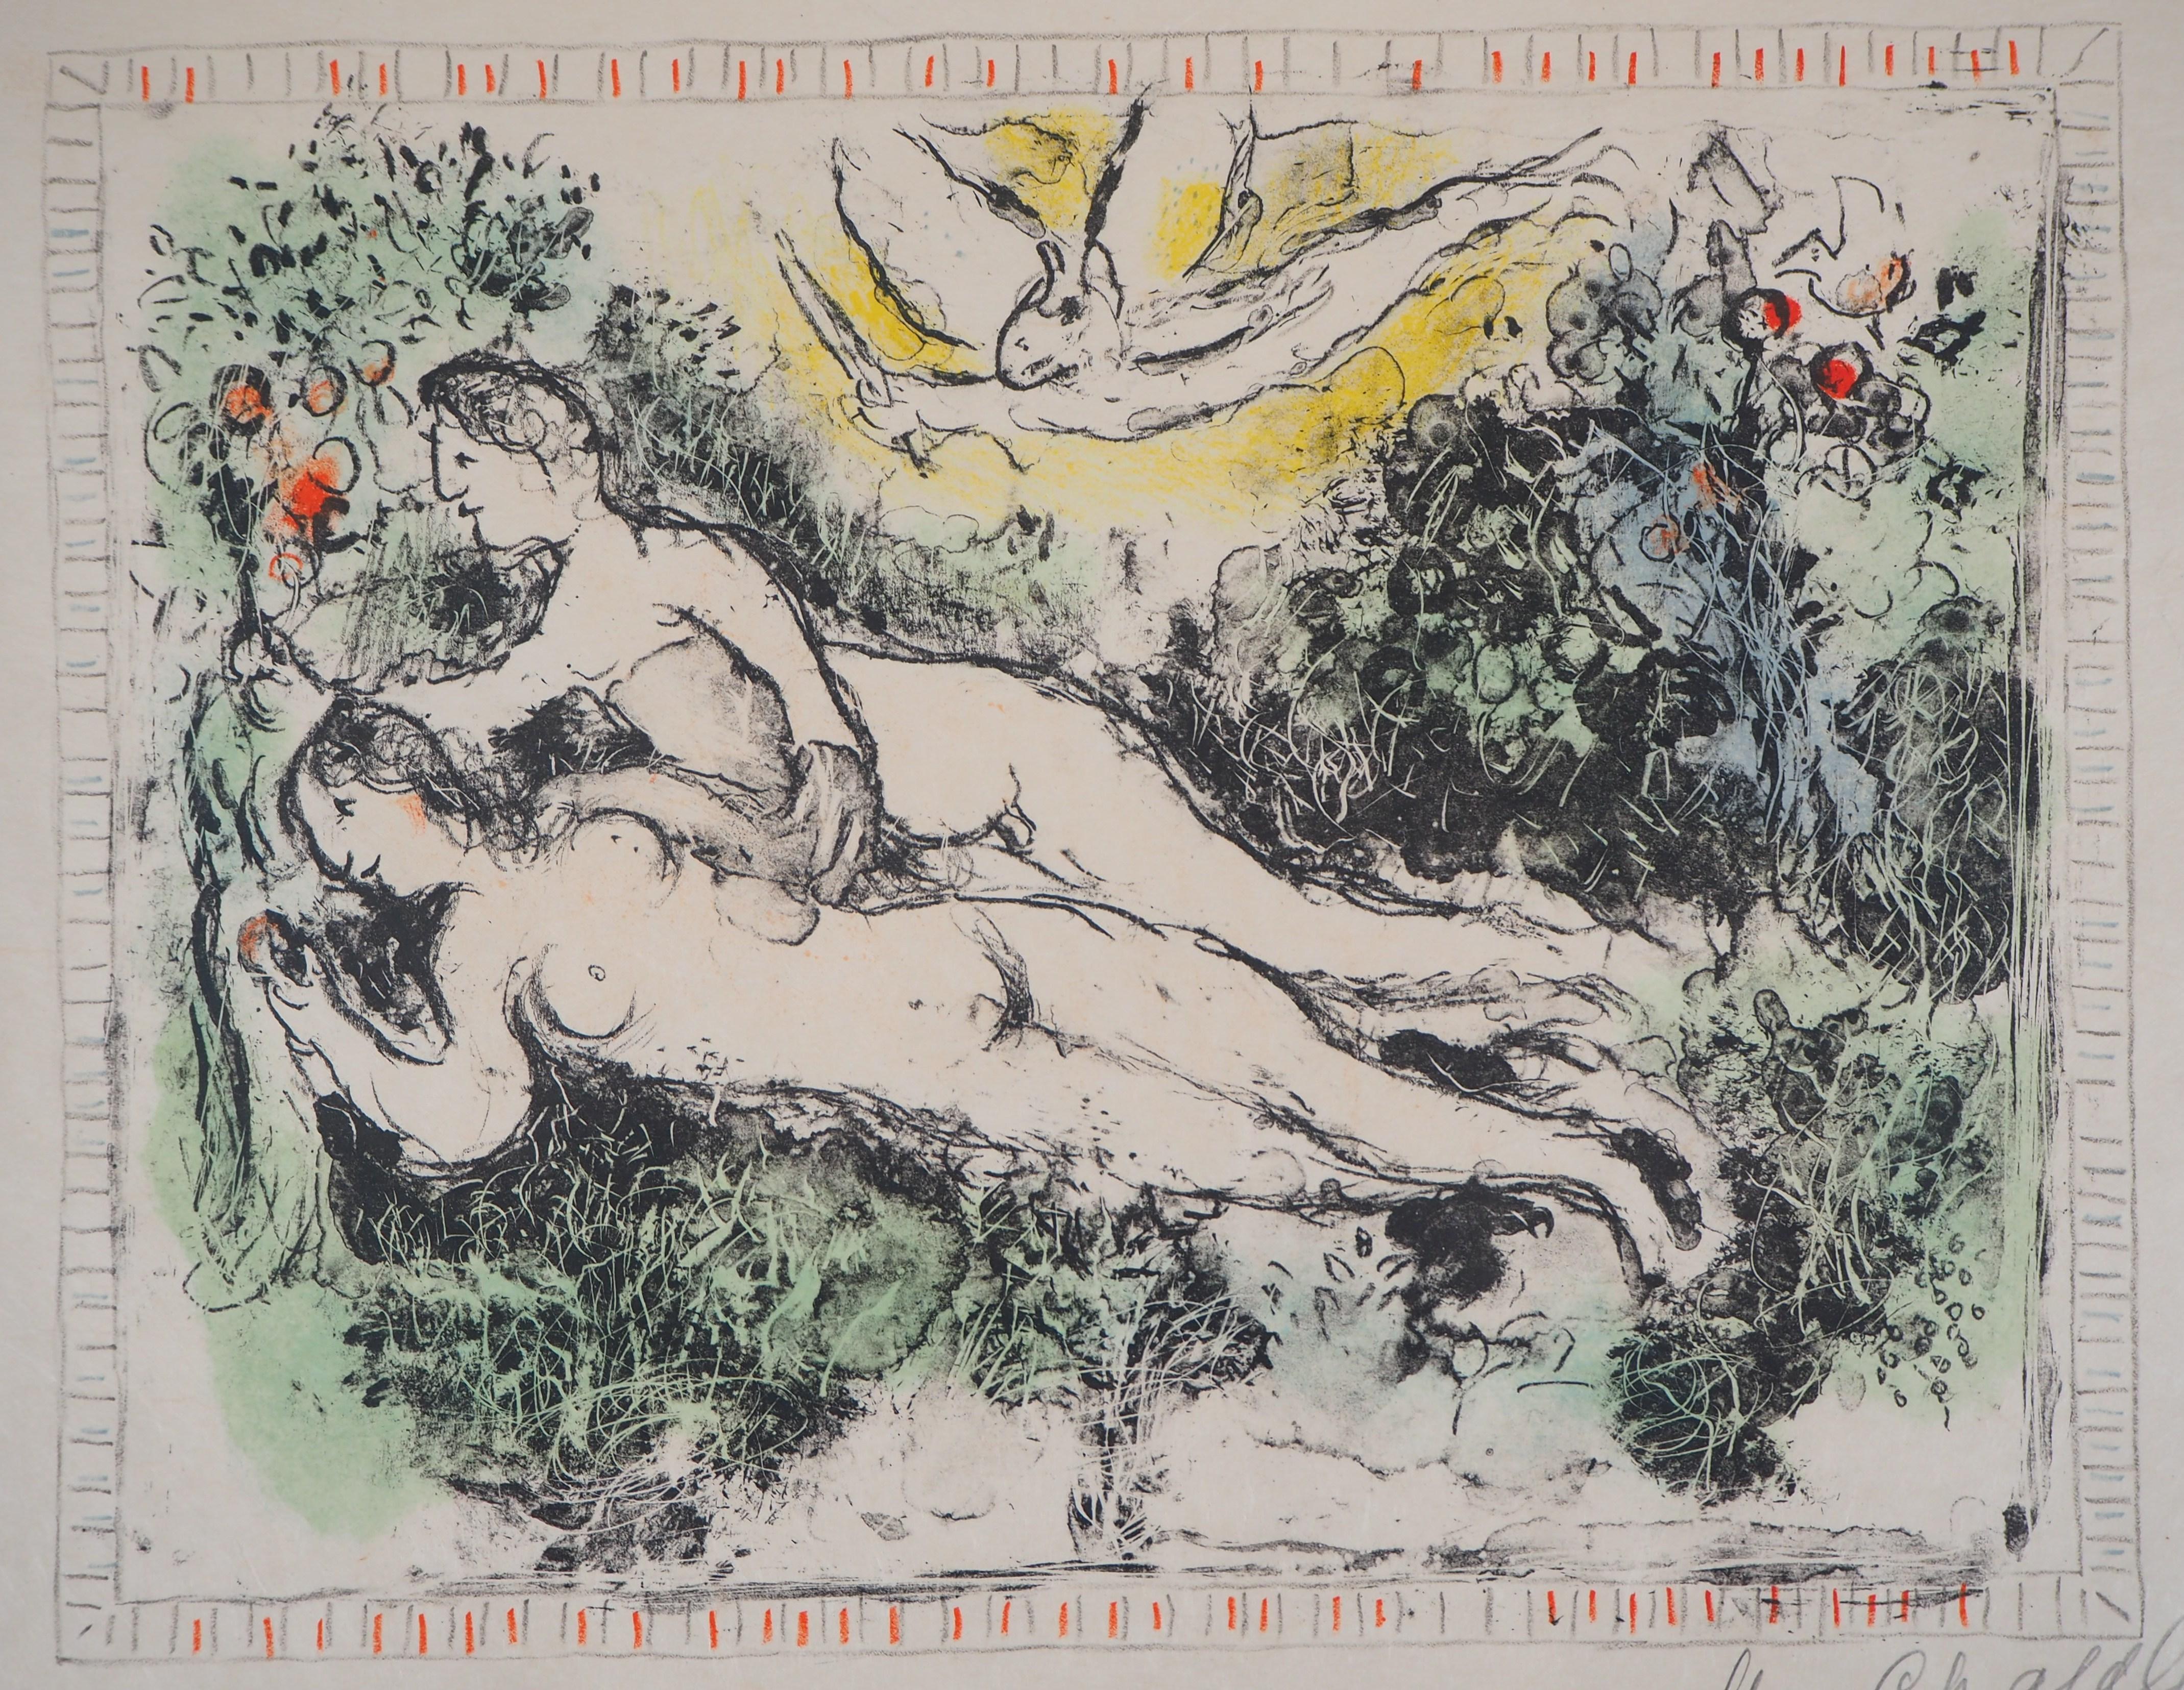 Marc CHAGALL
Lovers (Garden of Eden : Adam and Eve)

Original lithograph
Handsigned in pencil
Numbered / 50
On Japan paper 35 x 42 cm at view (c. 14 x 17 in)
Presented in a golden wood frame 54 x 60 cm (c. 22 x 24 in)

REFERENCES : Catalog raisonne